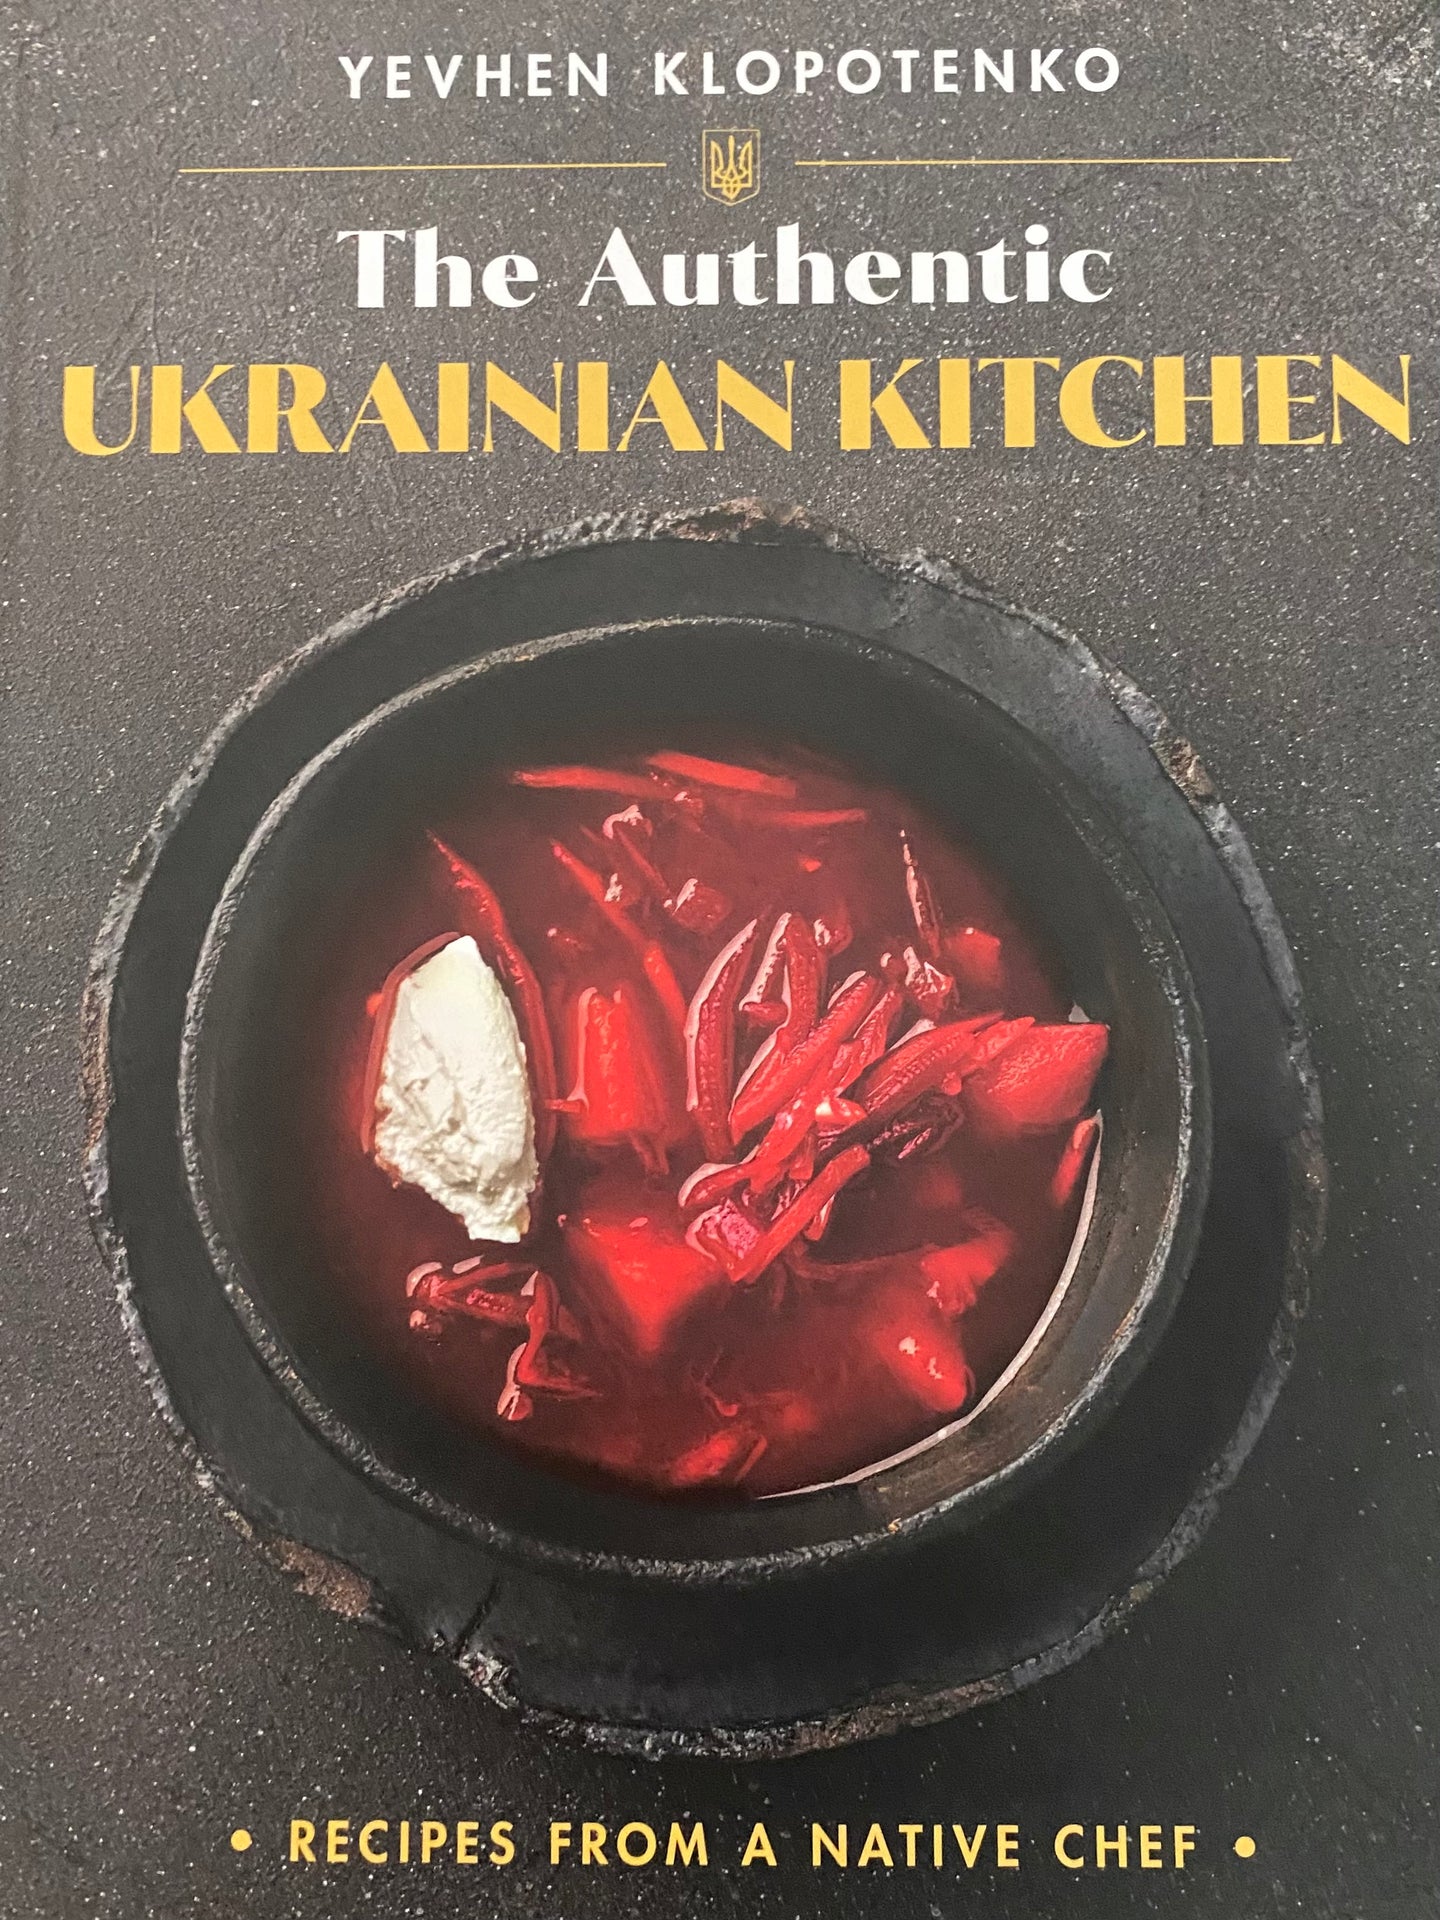 The Authentic Ukrainian Kitchen Recipes from a Native Chef by Yevhen Klopotenko